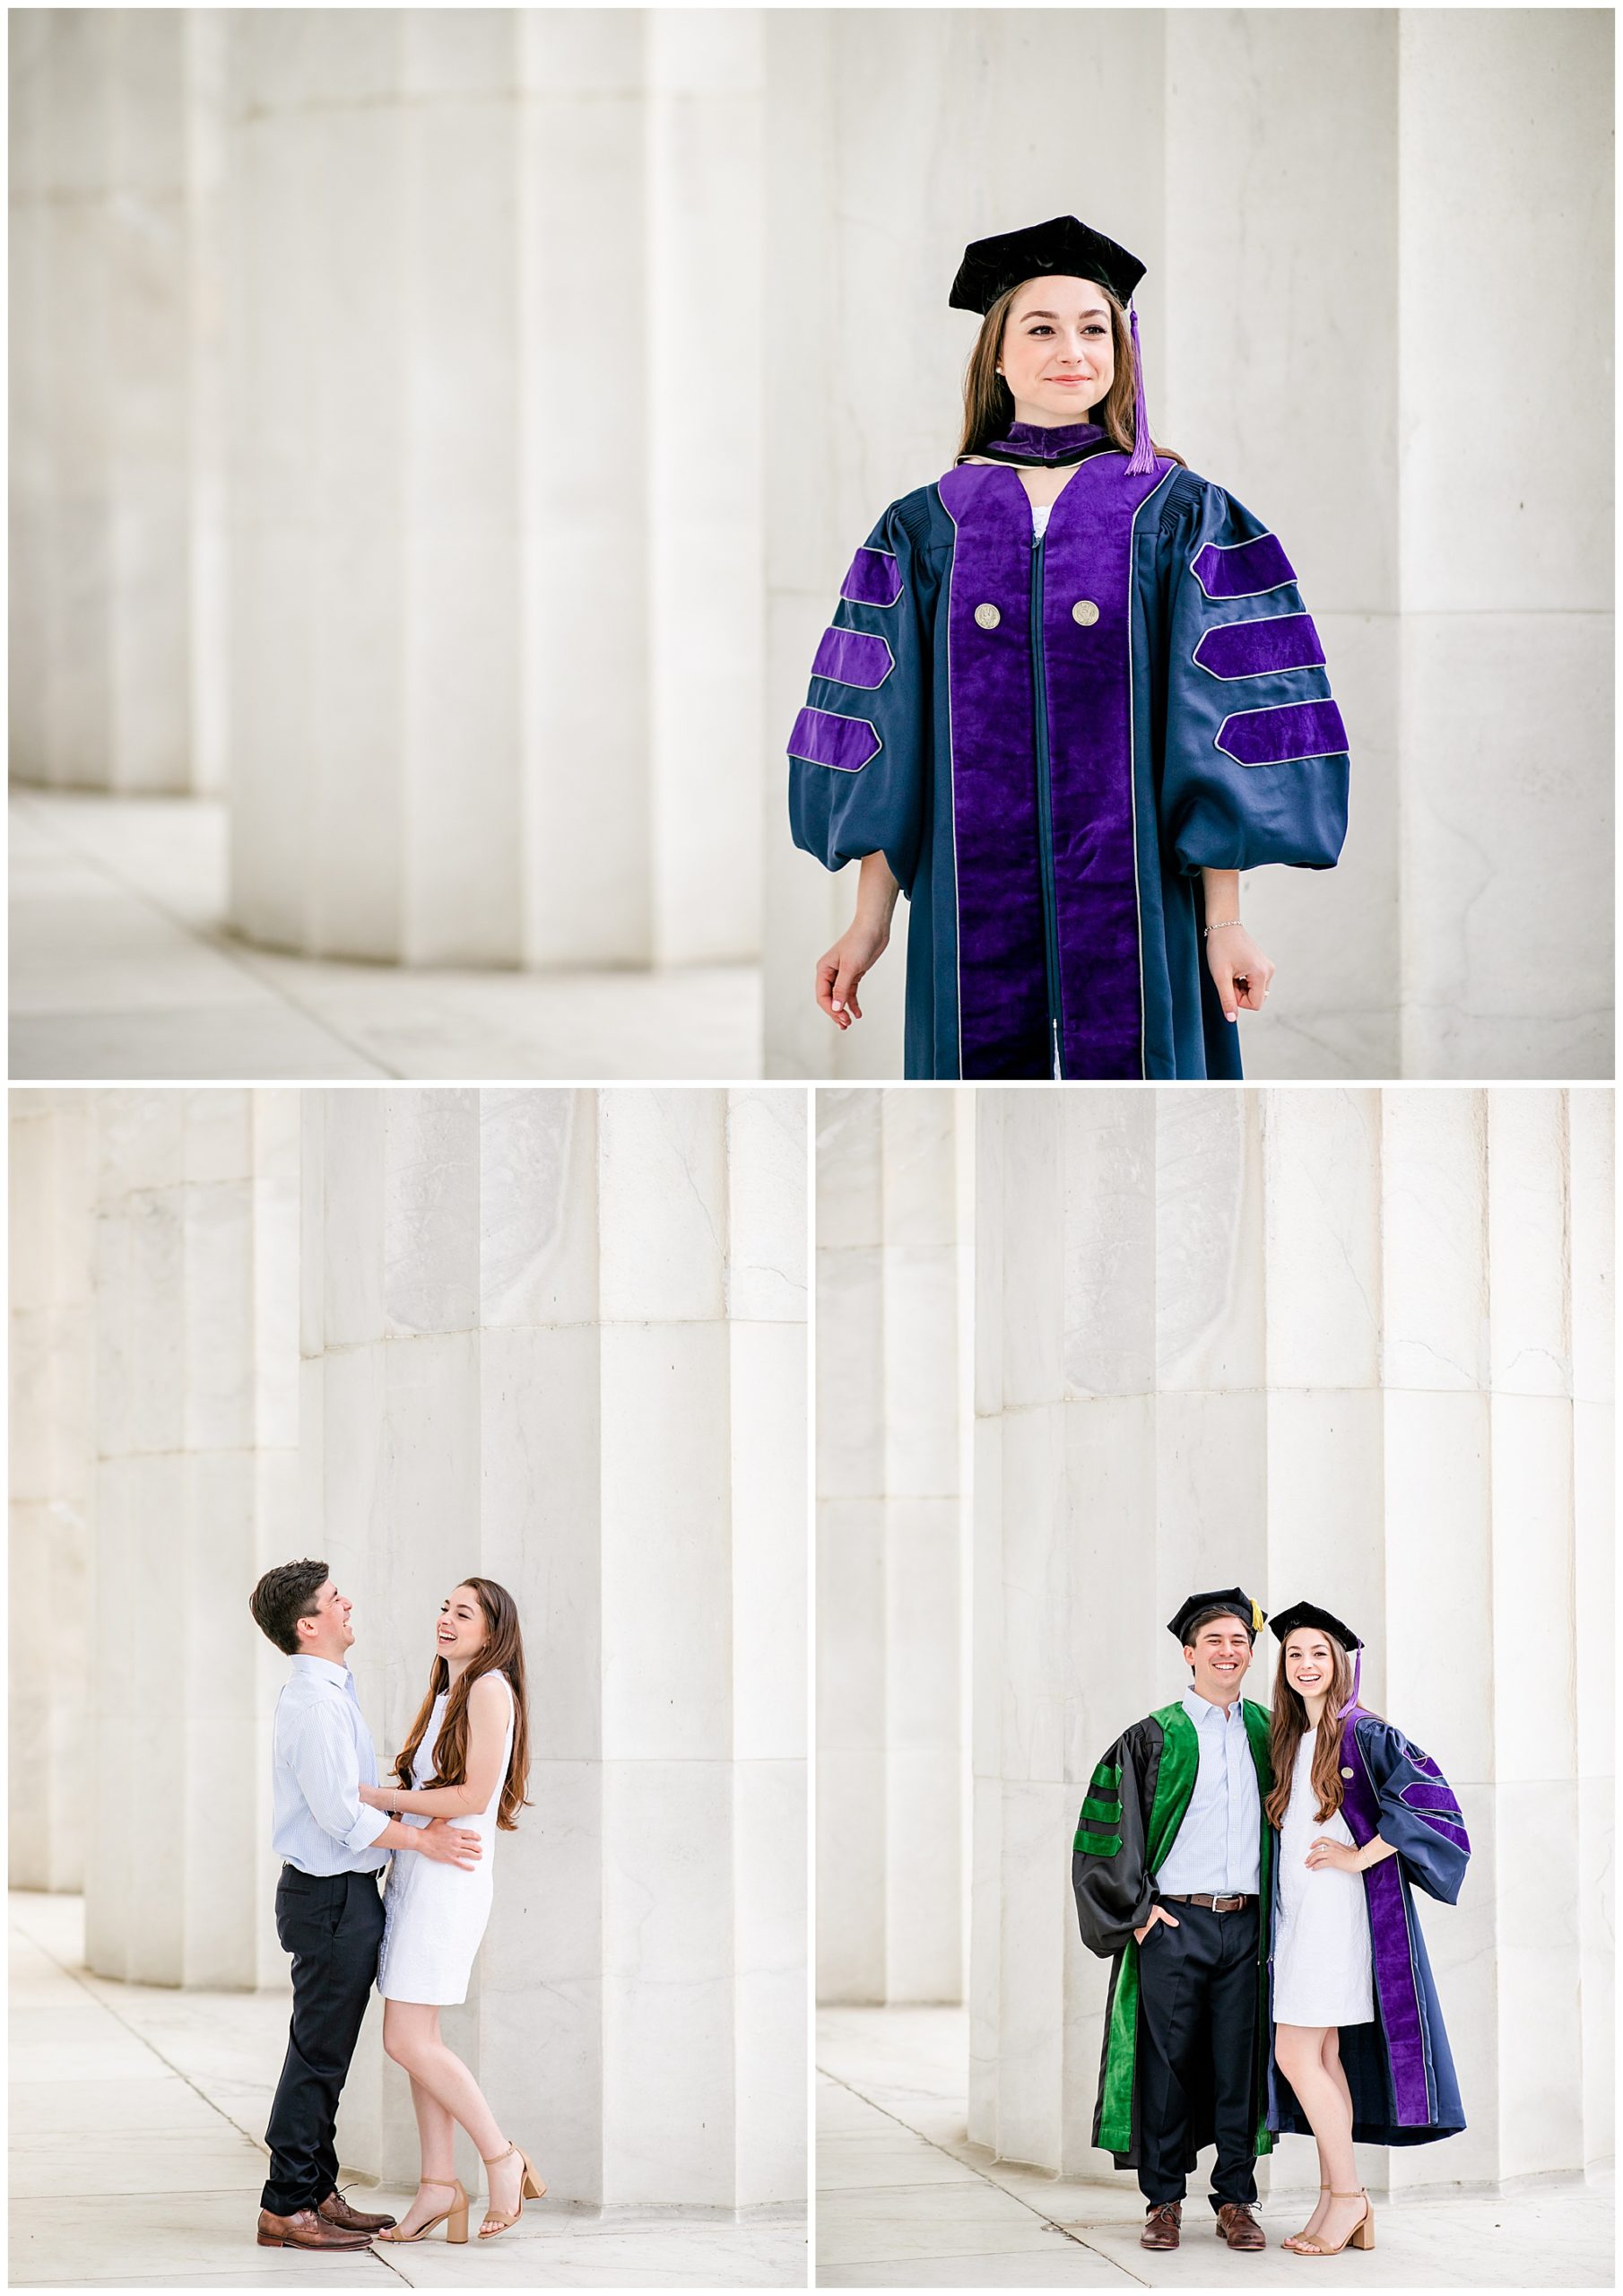 DC couple graduation photos, DC graduation portraits, DC grad photos, DC graduation photographer, spring graduation photos, Georgetown Law graduate, GW Medical School graduate, DC law school graduation photos, DC medical school graduation photos, Rachel E.H. Photography, couple laughing in Lincoln Memorial, couple in caps and gowns, woman in cap and gown